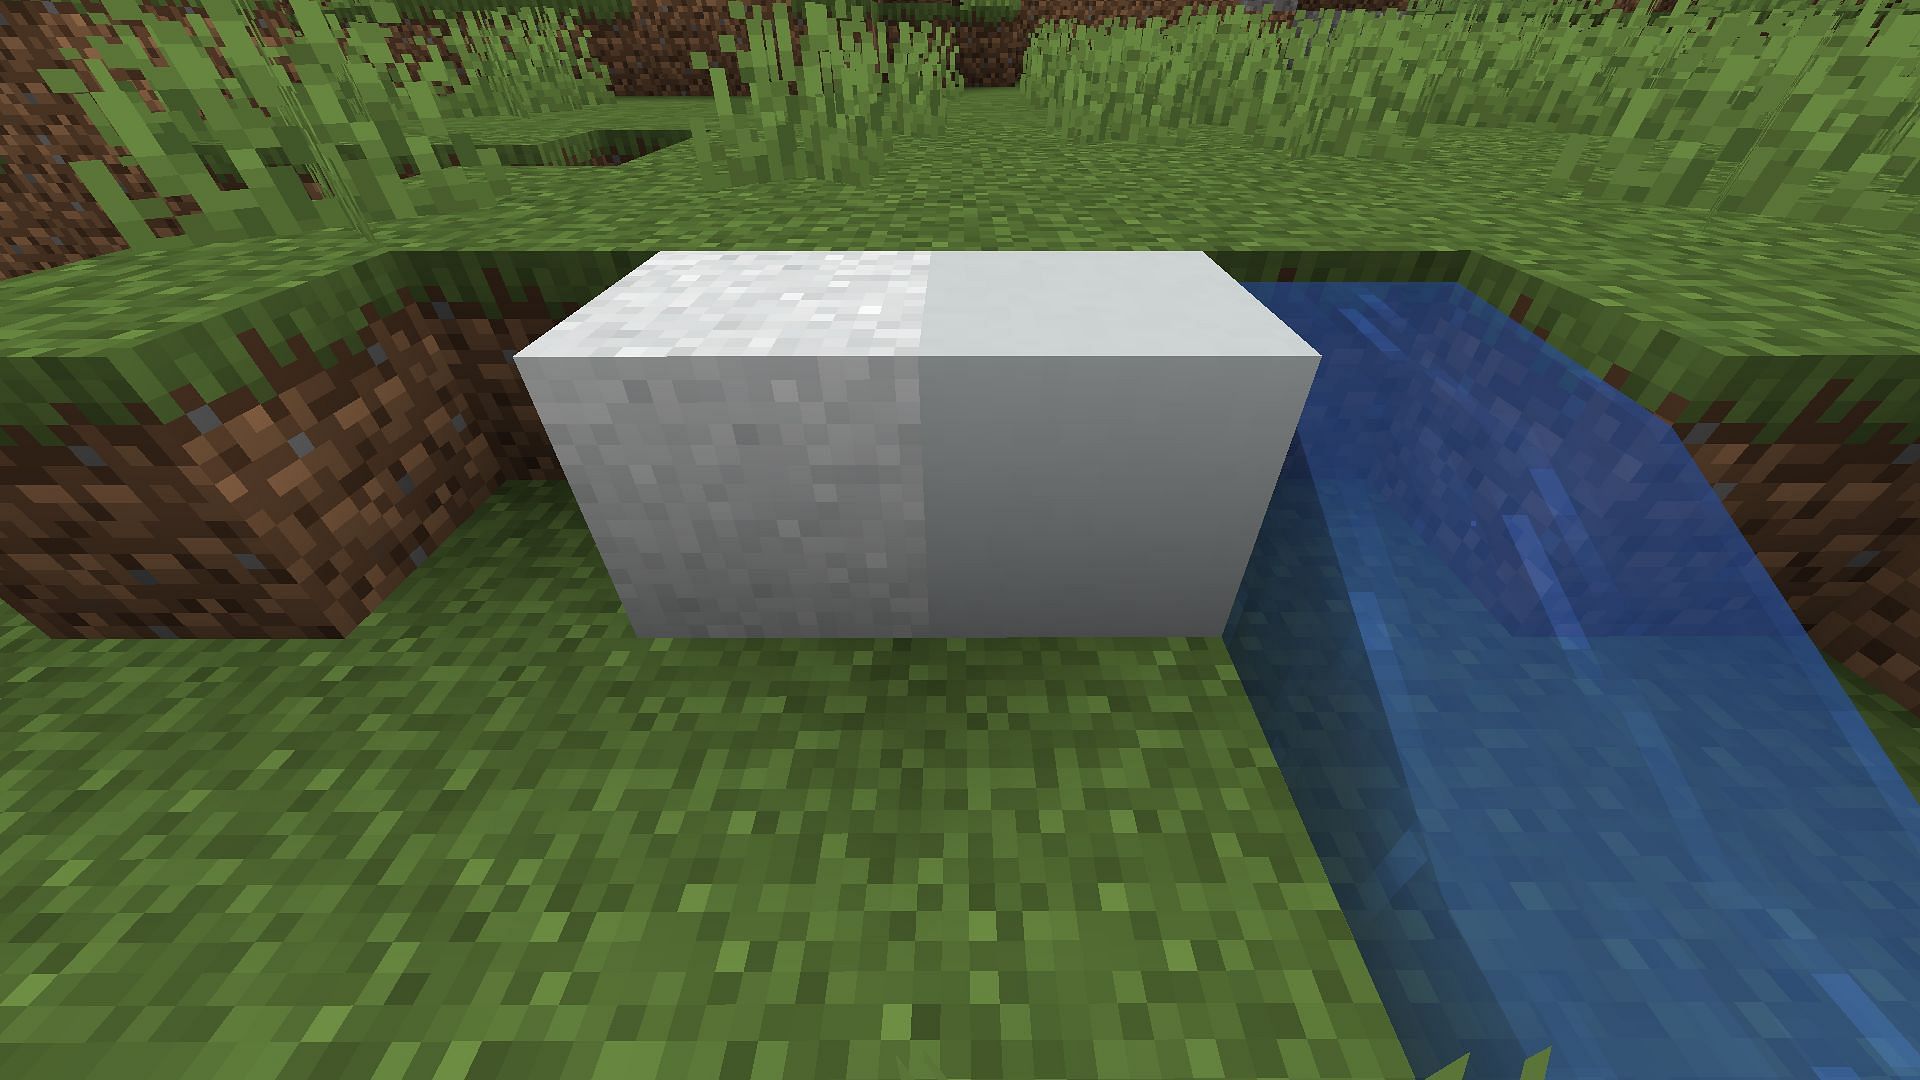 When water source block or water flowing block comes in contact with concrete powder blocks, they instantly convert into solid concrete (Image via Minecraft 1.19)